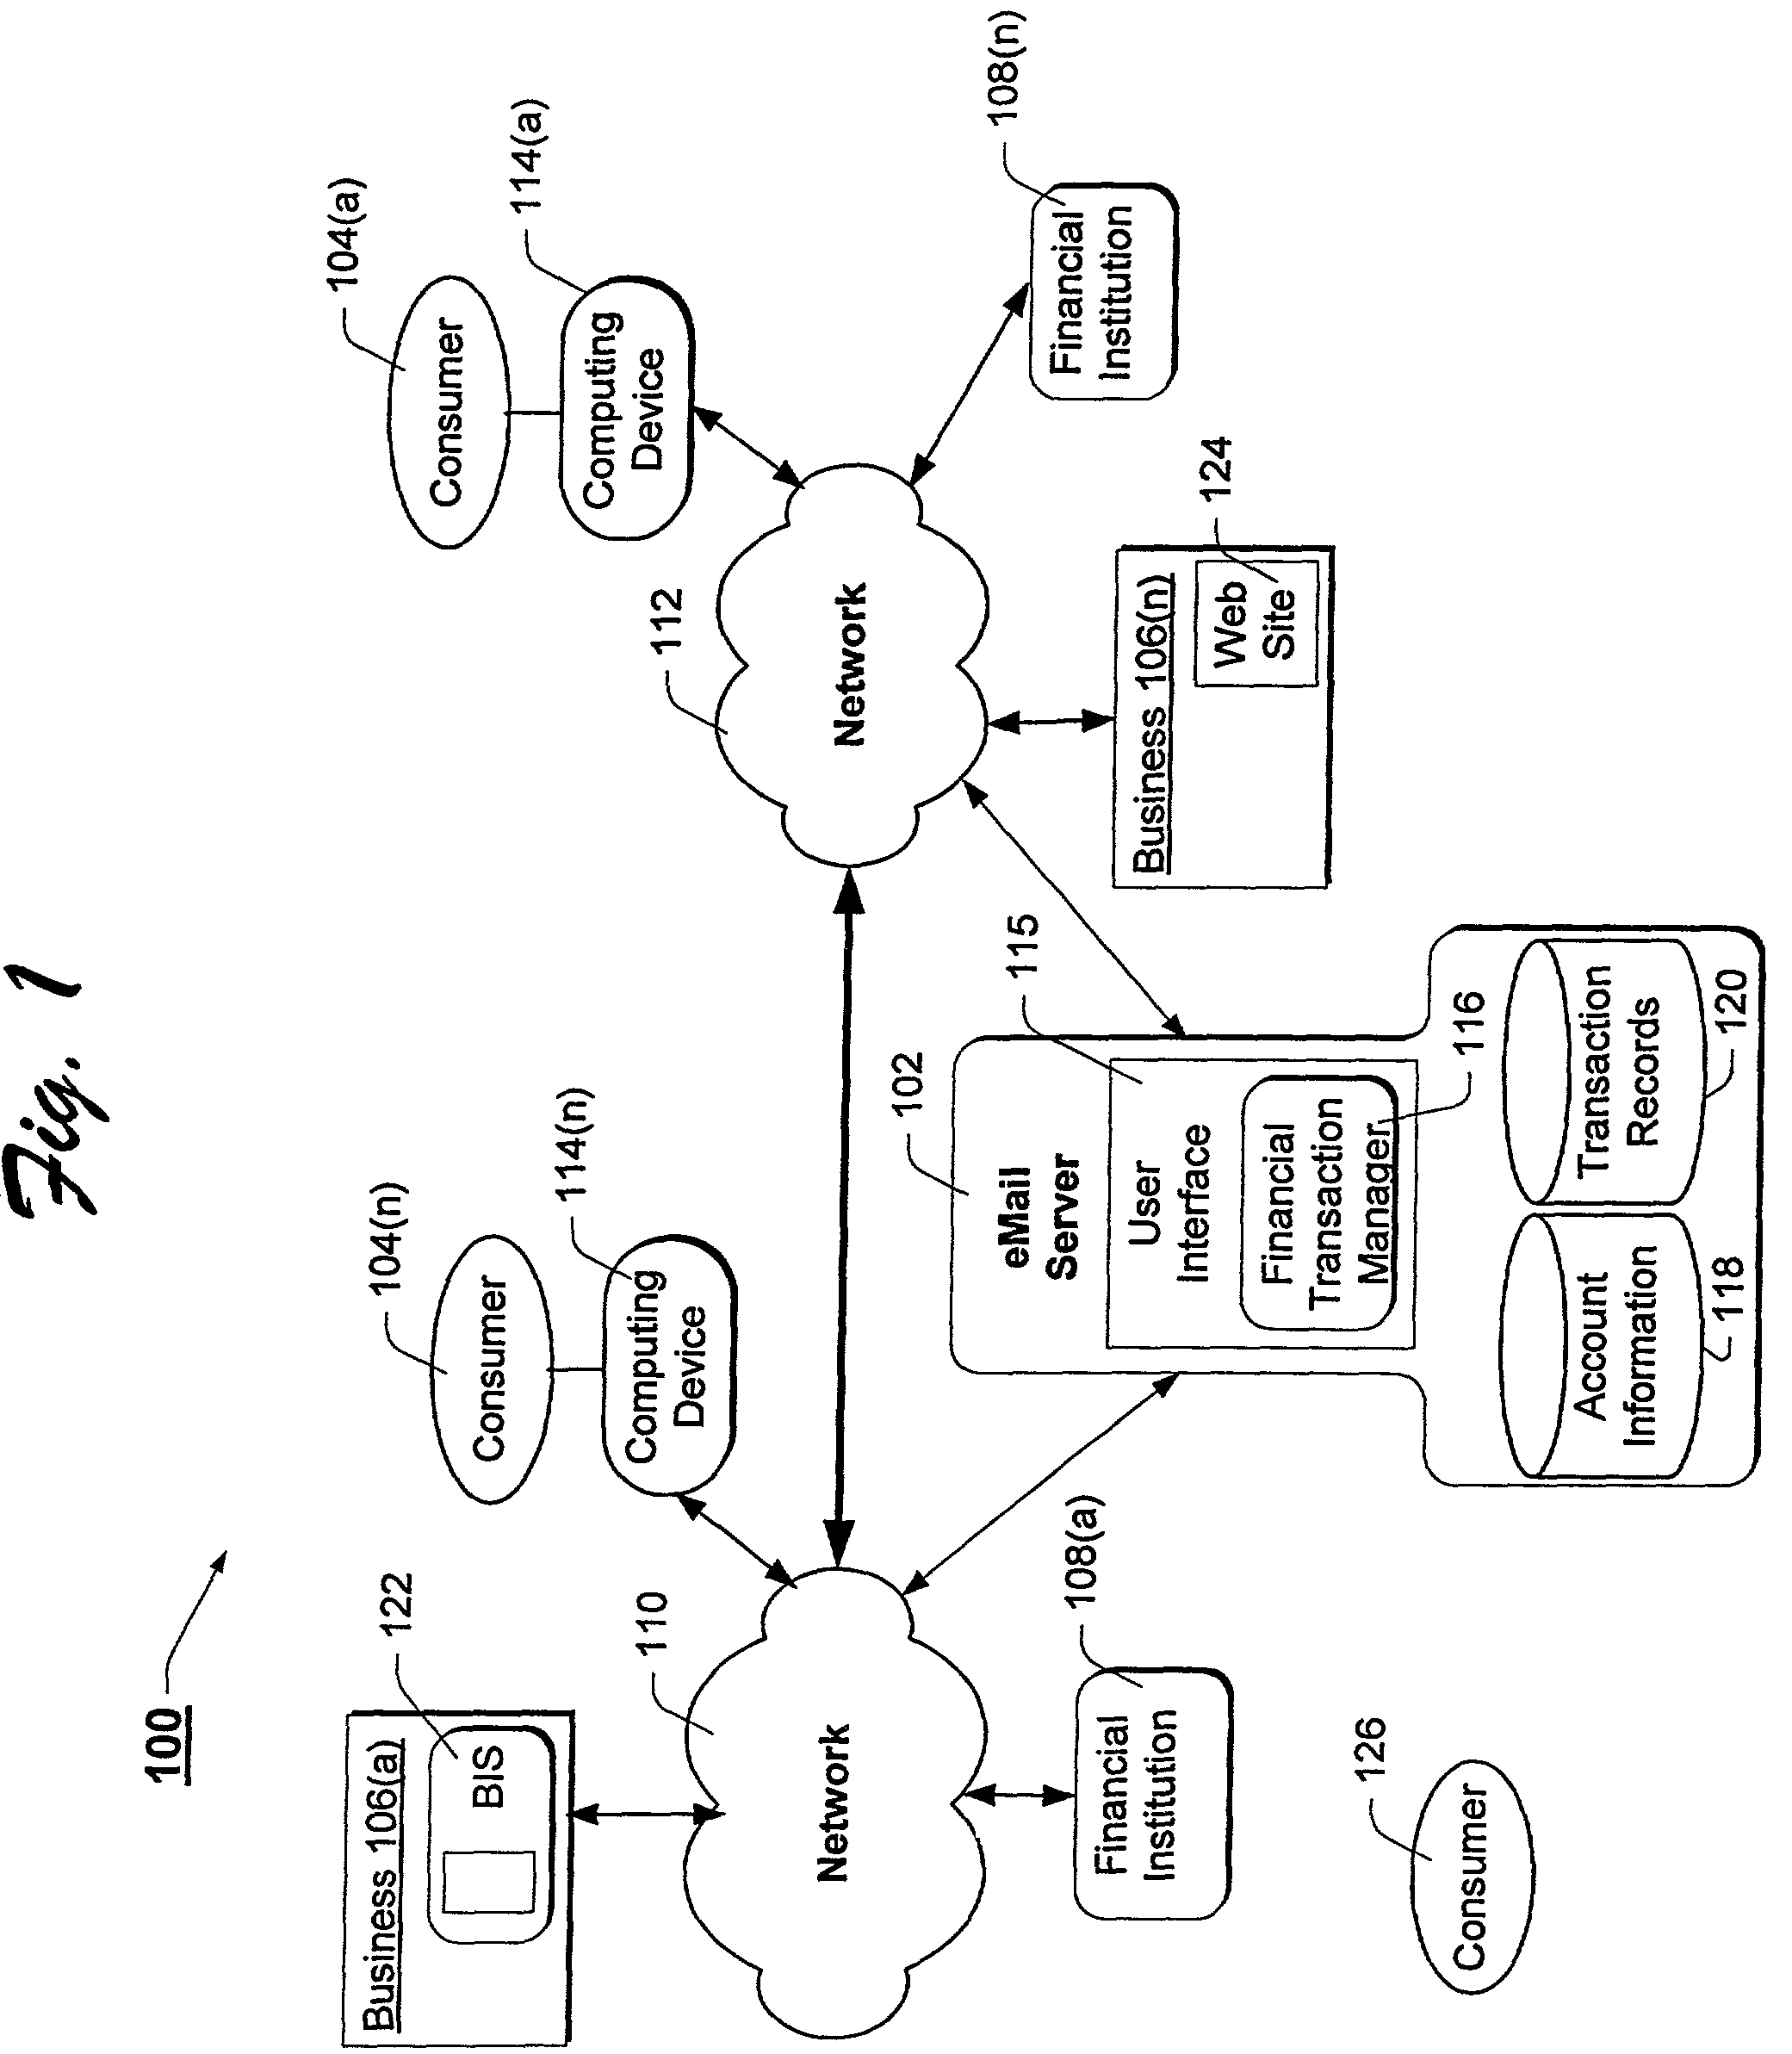 System and method for secure distribution of information via email